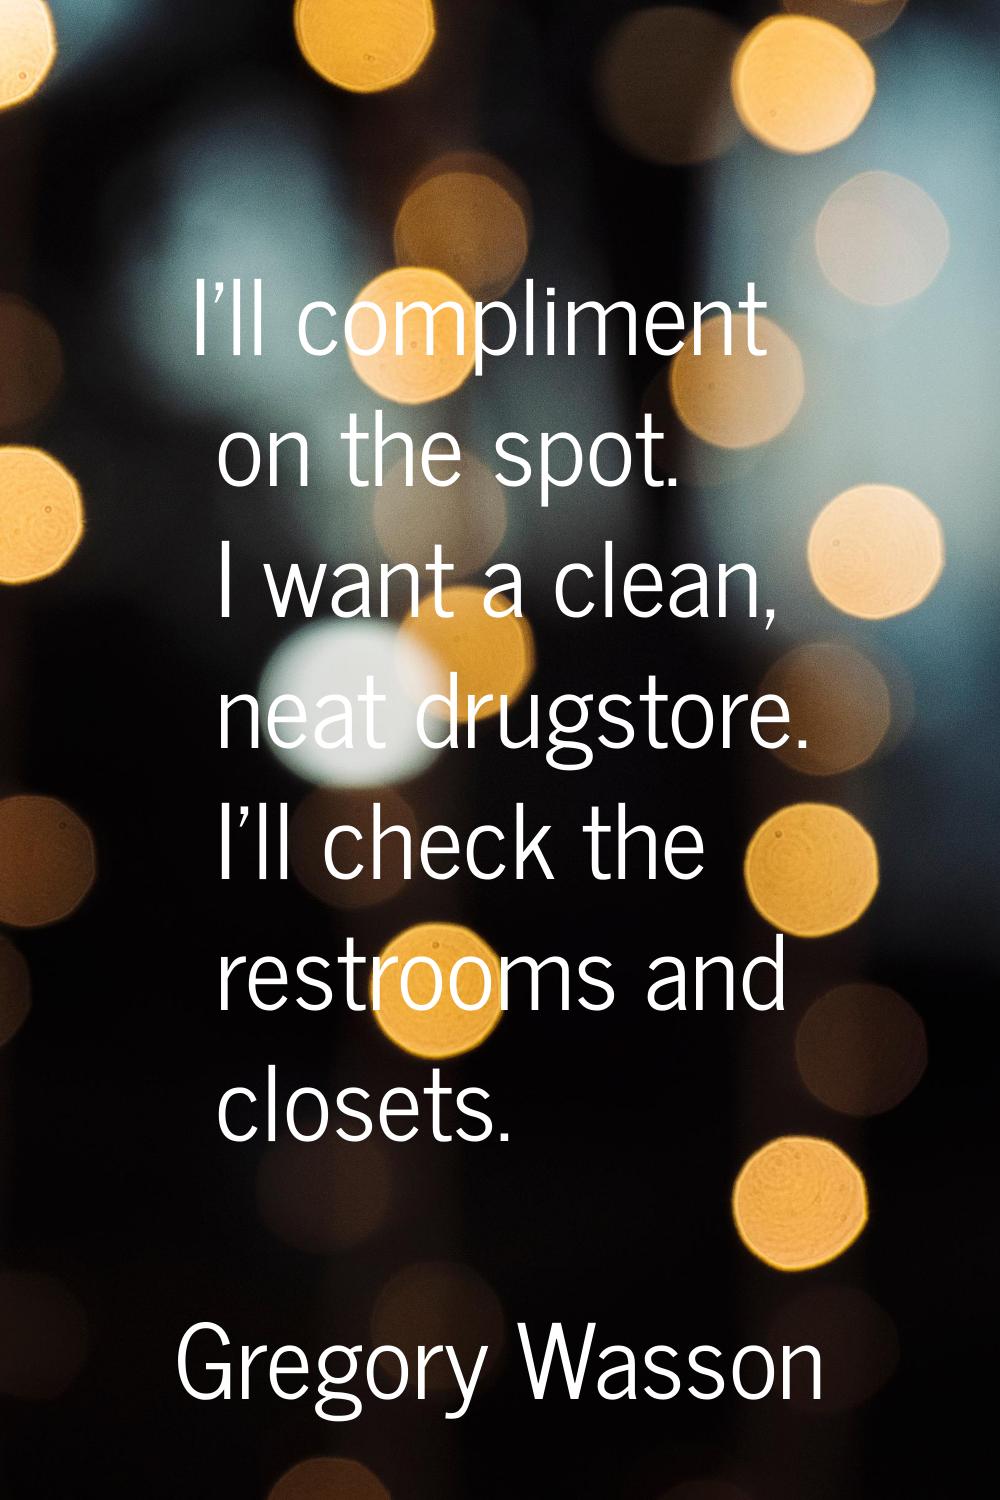 I'll compliment on the spot. I want a clean, neat drugstore. I'll check the restrooms and closets.